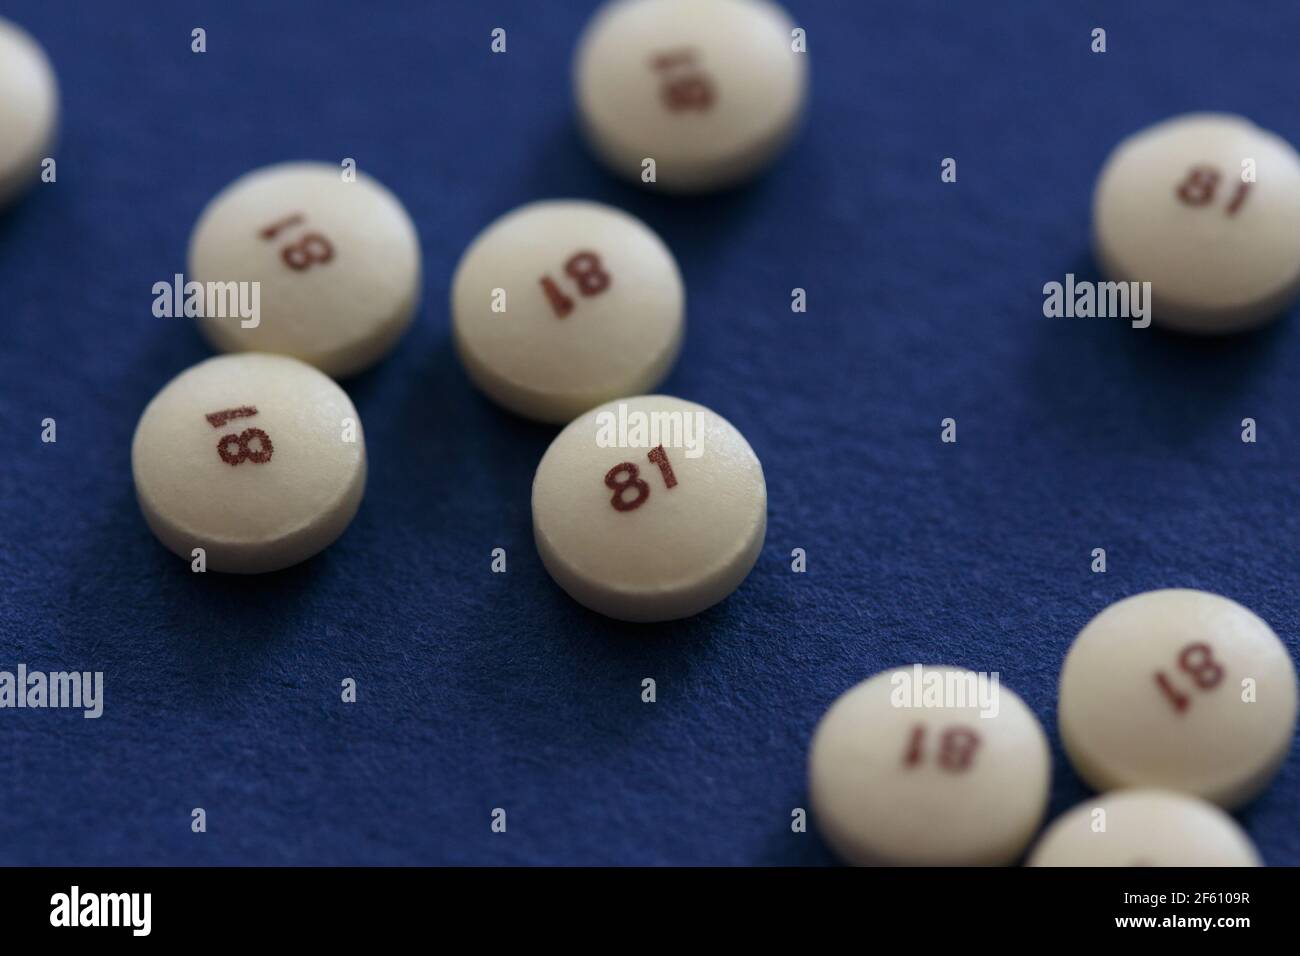 scattered low dose 81 milligrams aspirin on a blue background with a low depth of field, commonly used as a preventive medicine for heart disease with Stock Photo